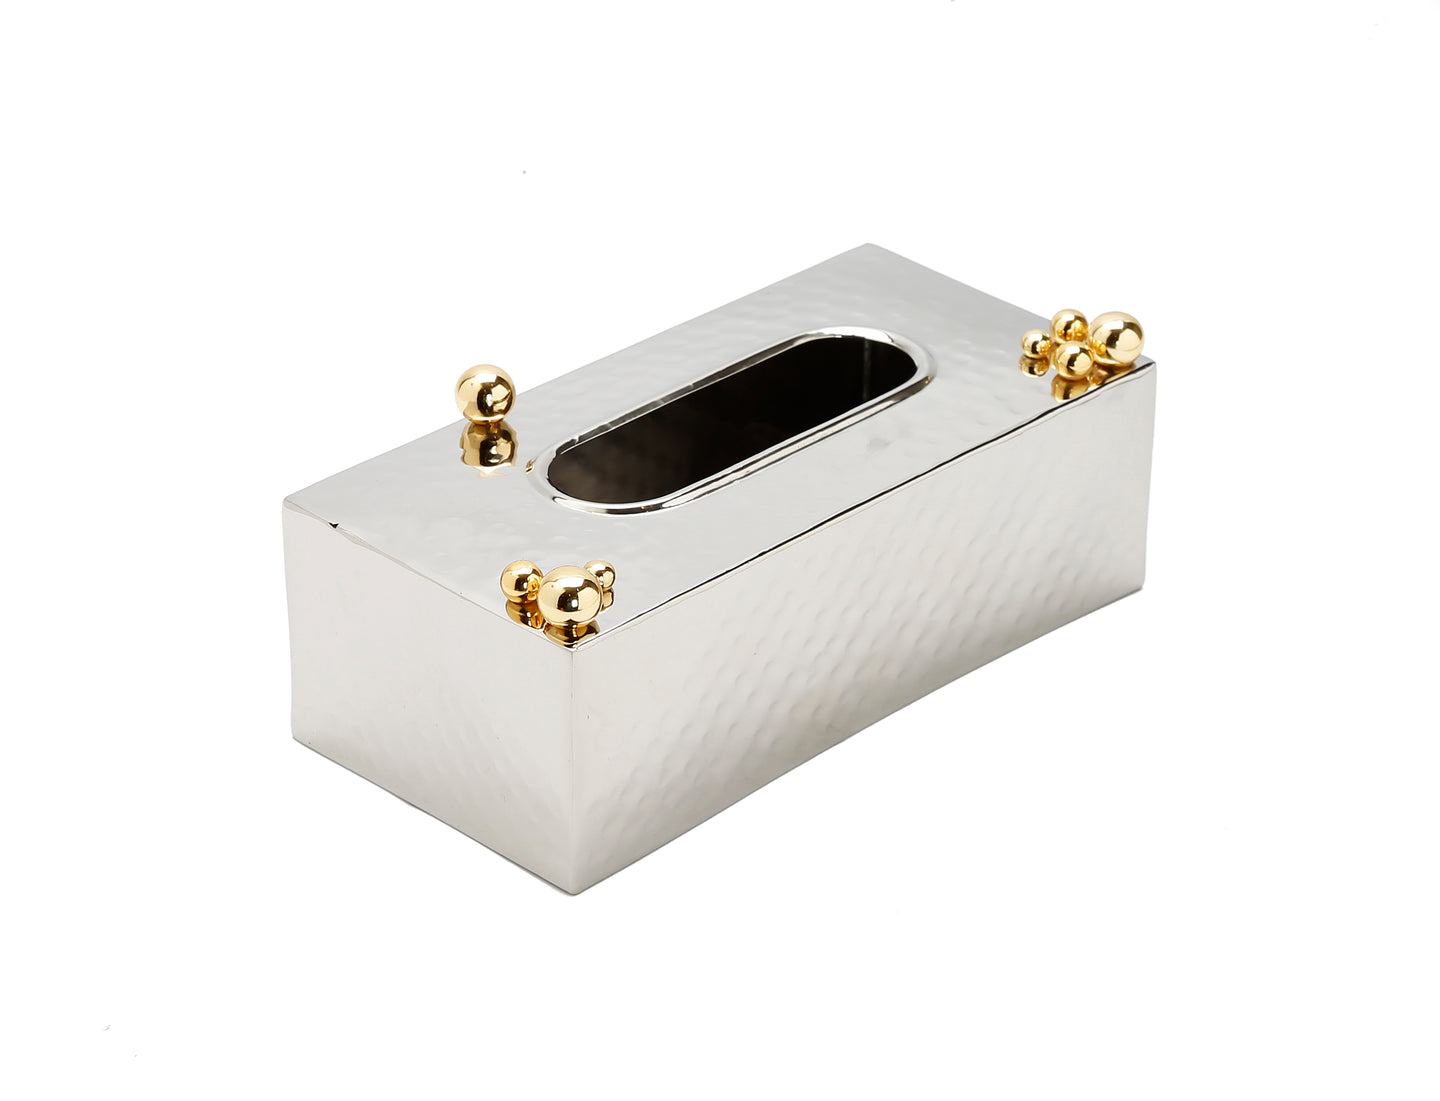 Hammered Stainless Steel Tissue Box Gold Ball design on Top